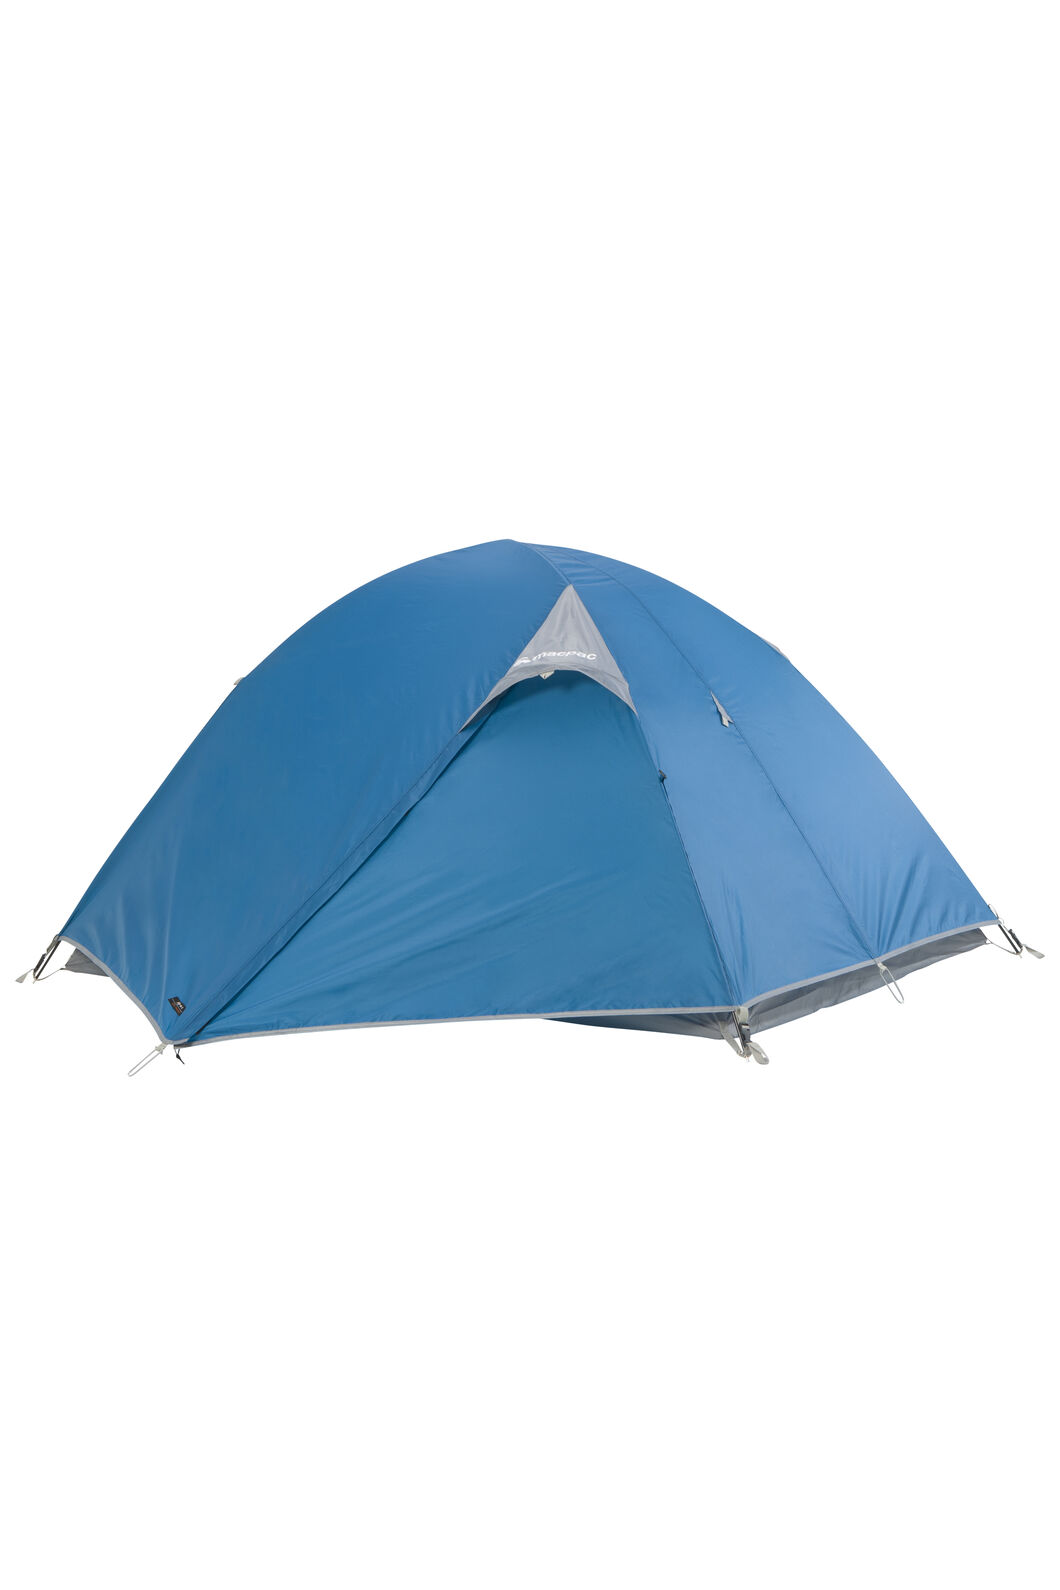 Macpac Apollo Camping Tent — Two Person | Macpac